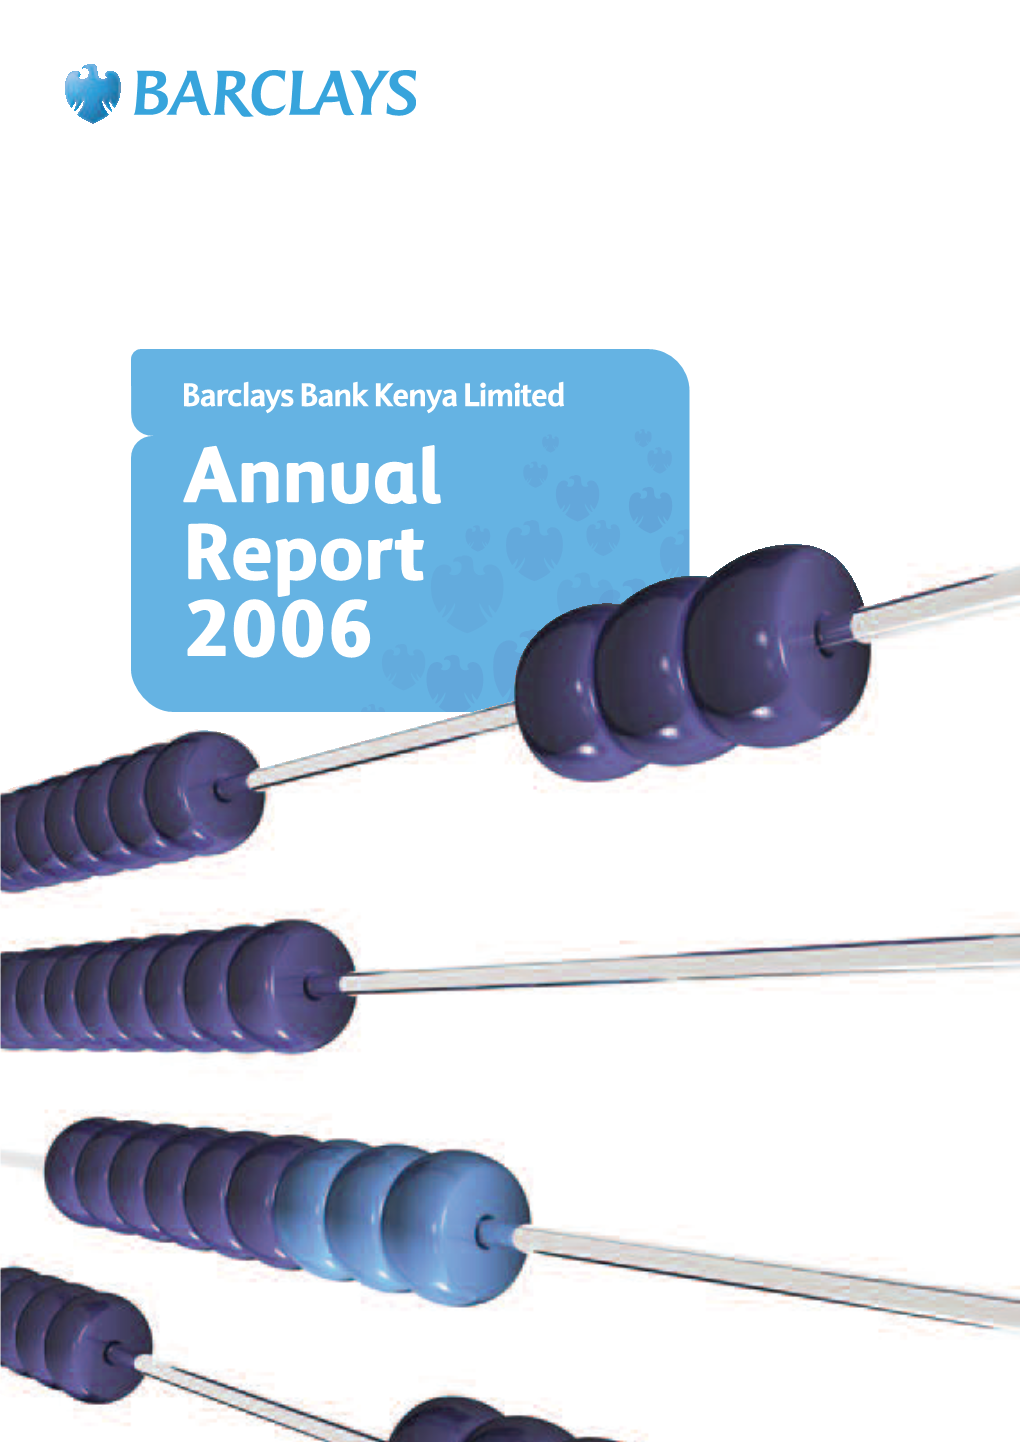 Barclays Annual Report 2006